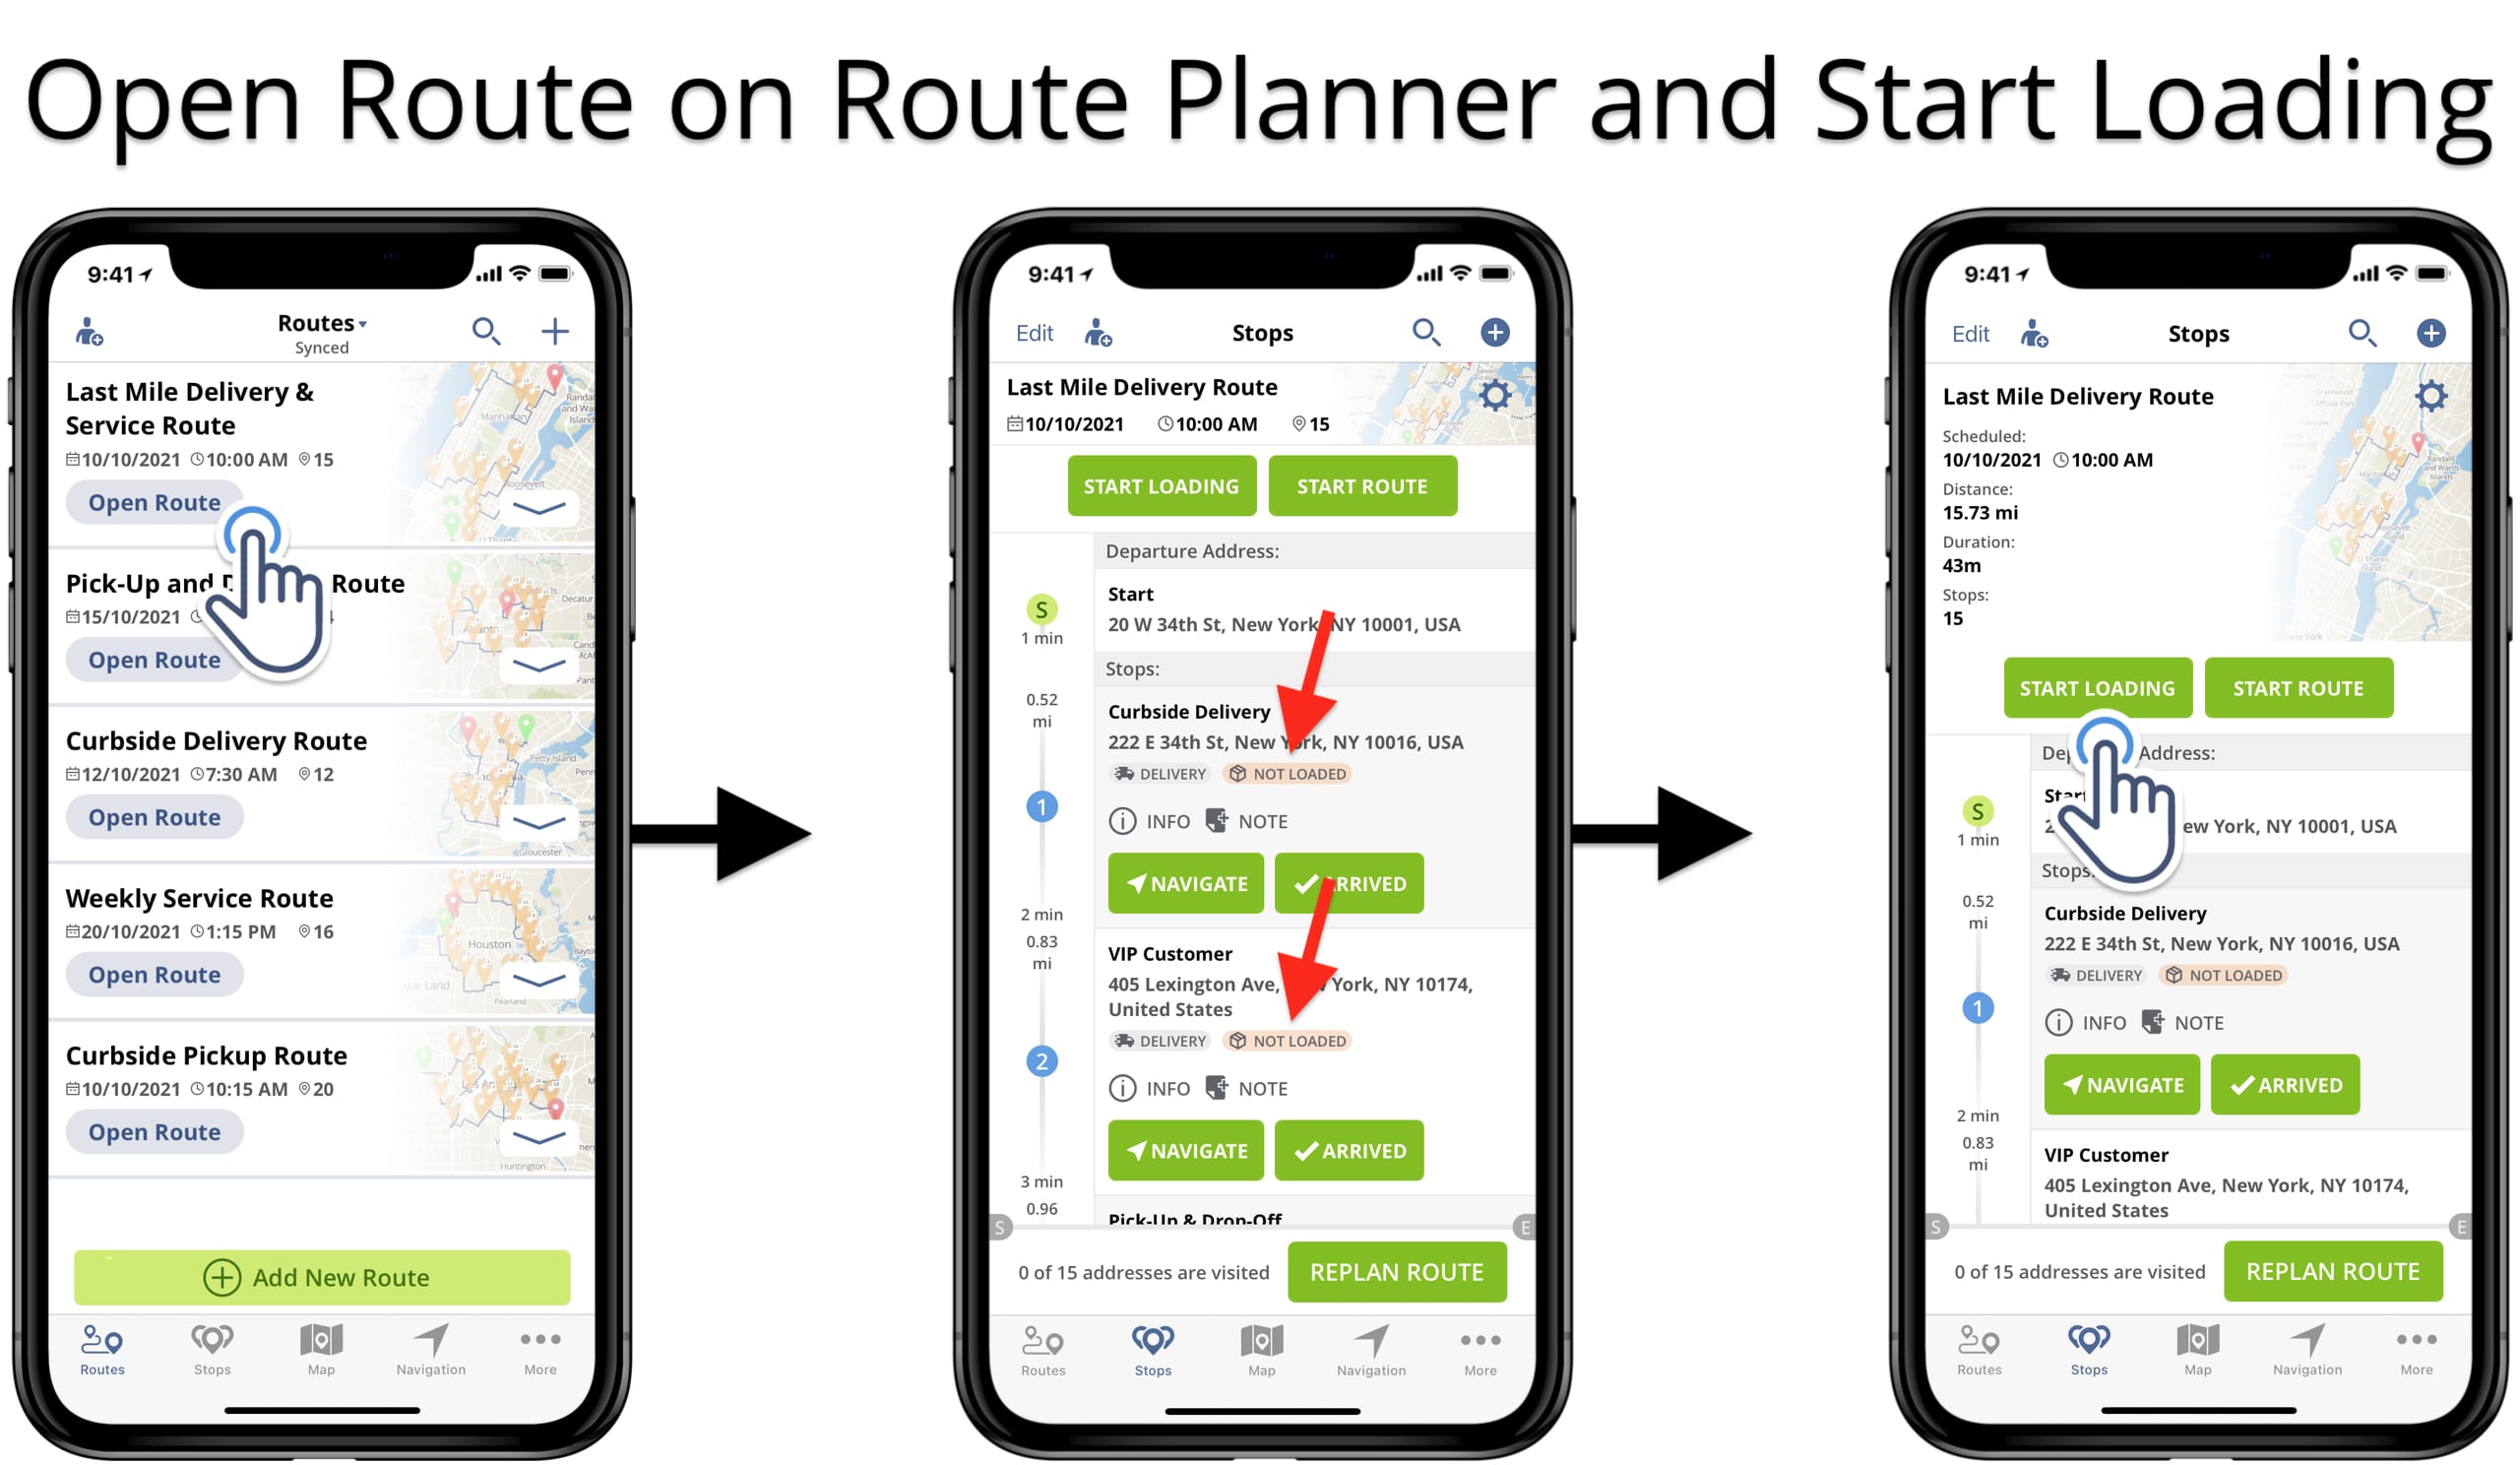 Open route on route planner app and scan barcodes to start loading packages on the vehicle.